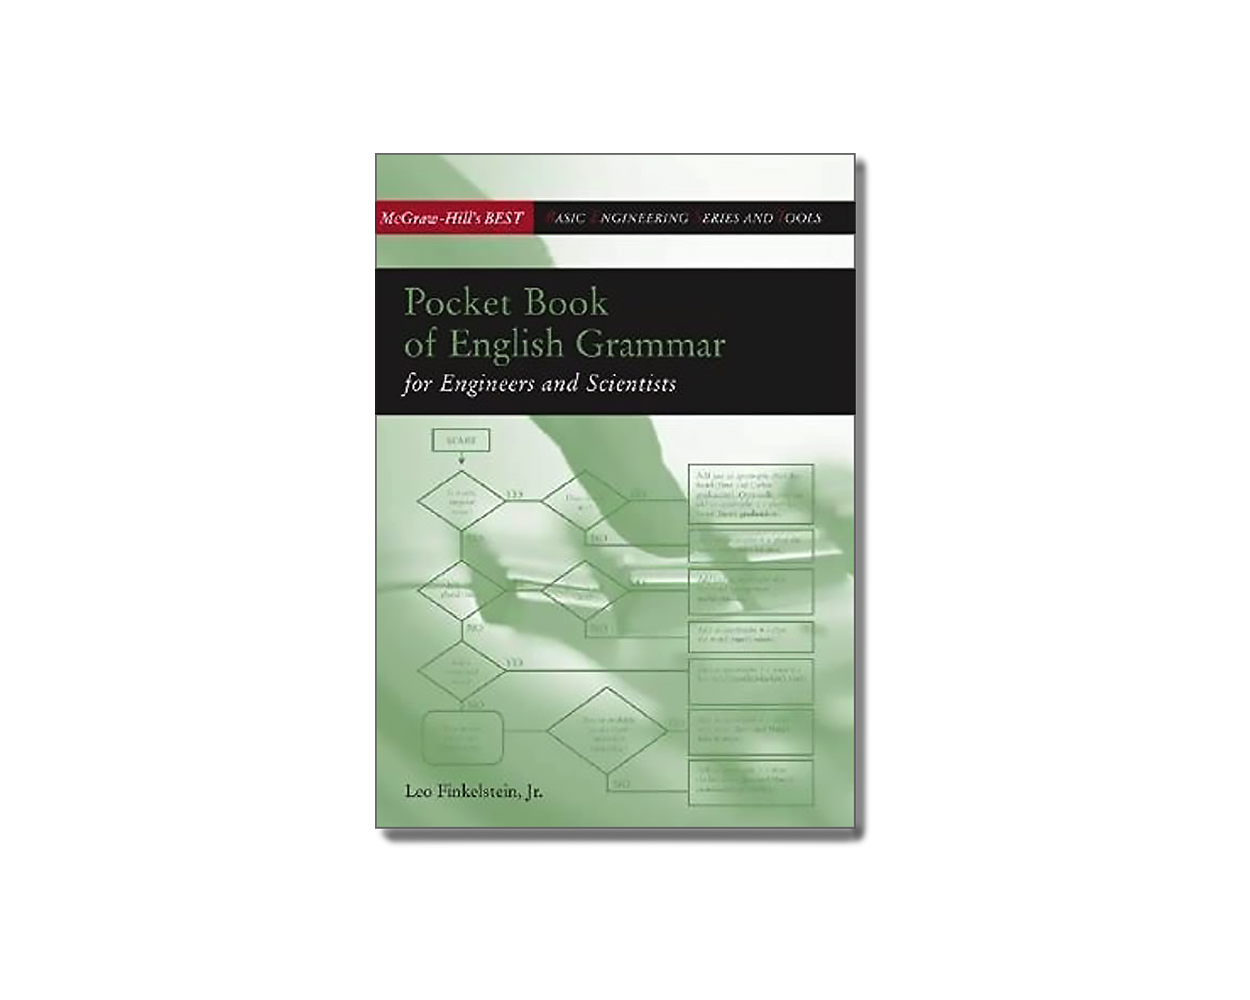 Grammar　and　of　English　by　for　Fi:　Engineers　Best)　Builder's　Scientists　(McGraw-Hill　Engineering　Leo　Book,　Pocket　Book